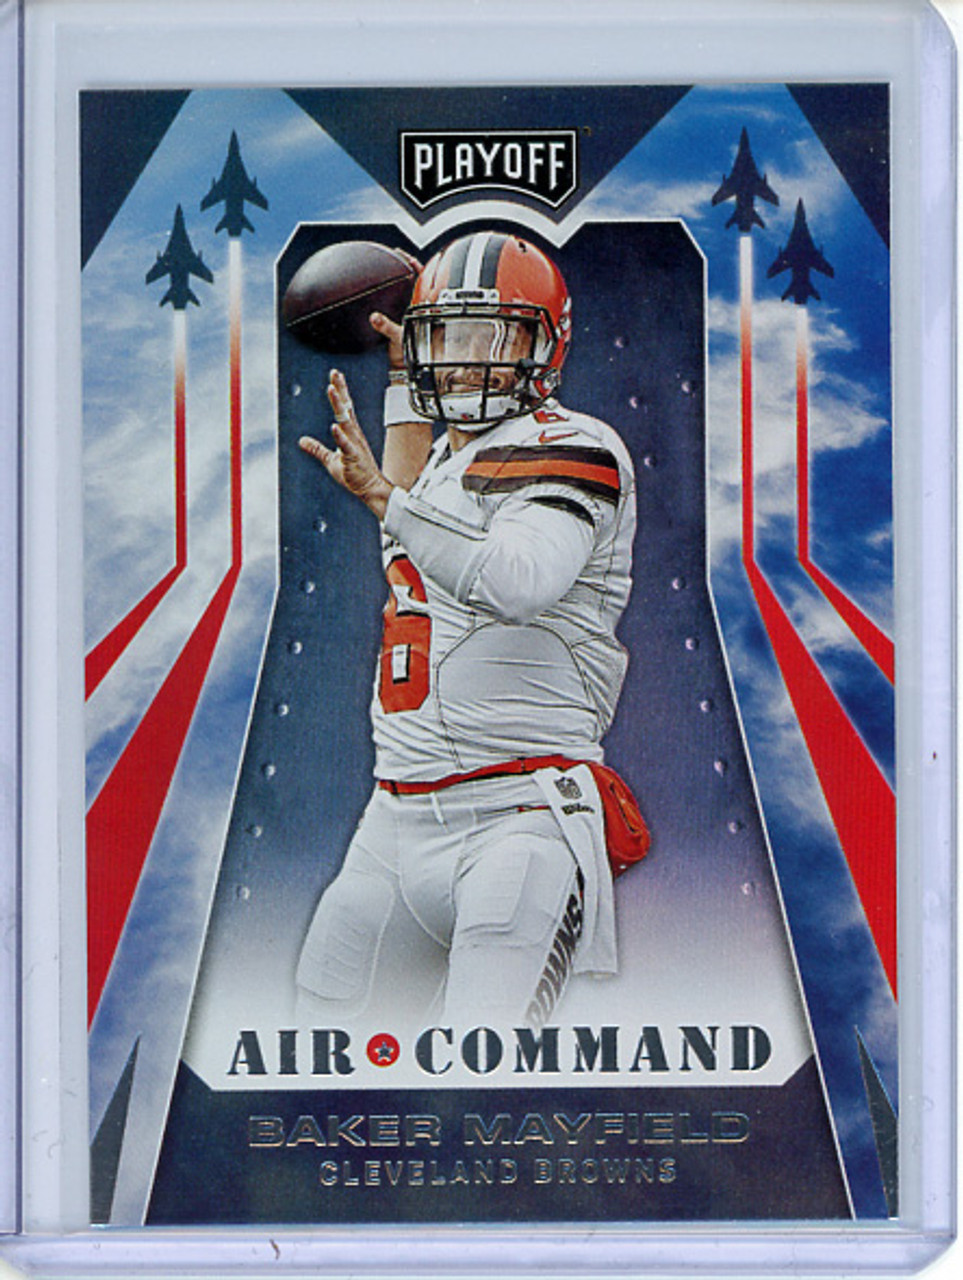 Baker Mayfield 2019 Playoff, Air Command #15